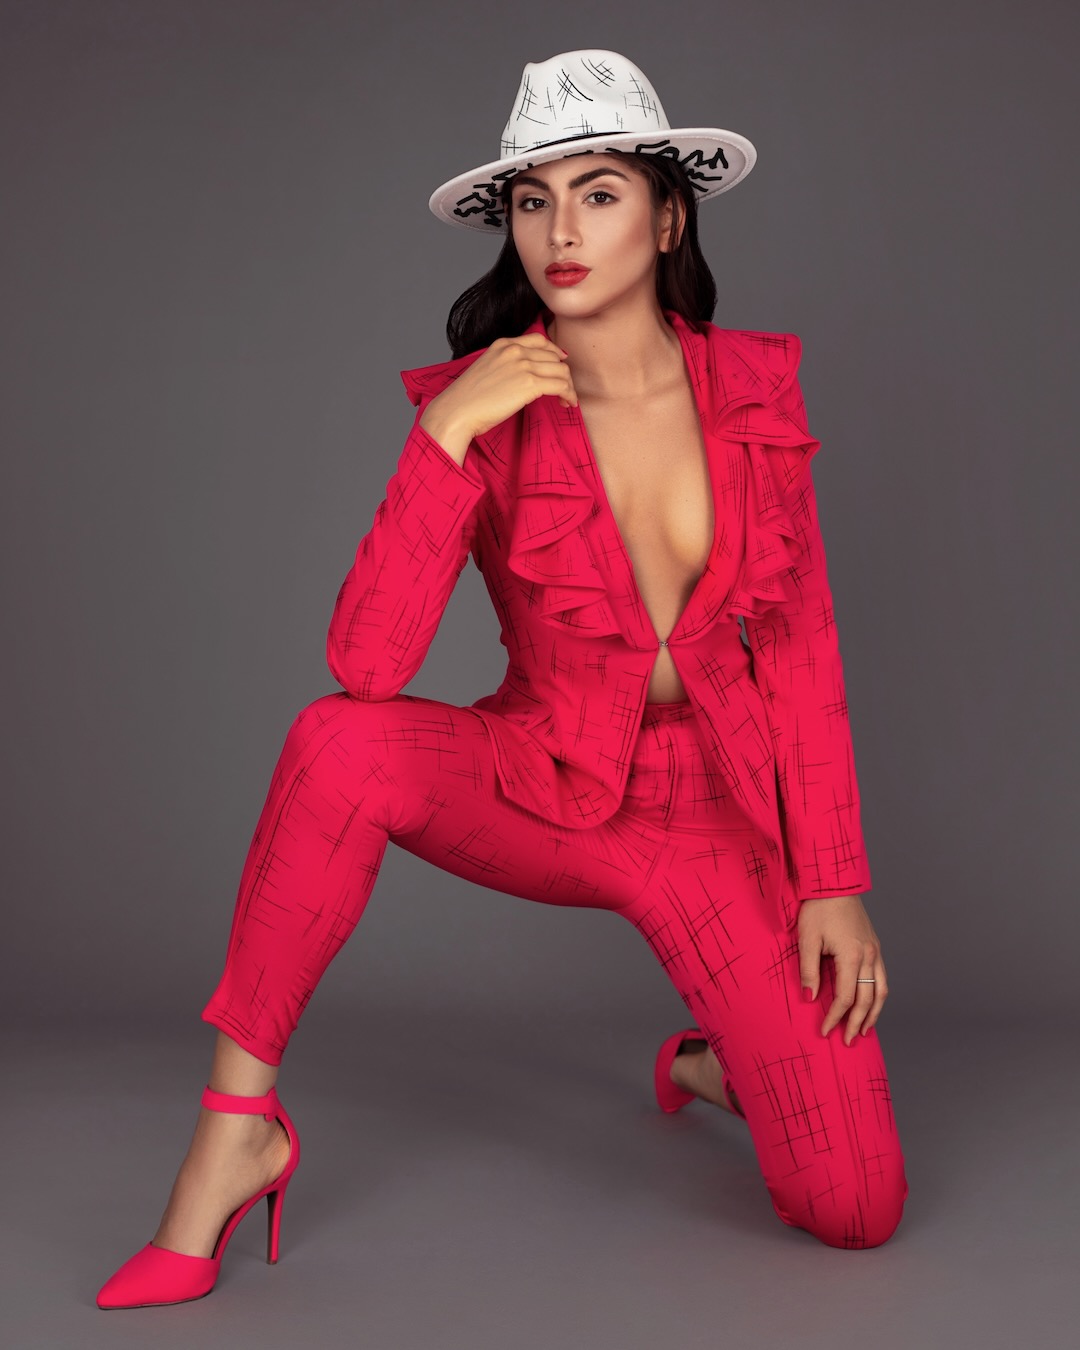 Lady In Pink Suit